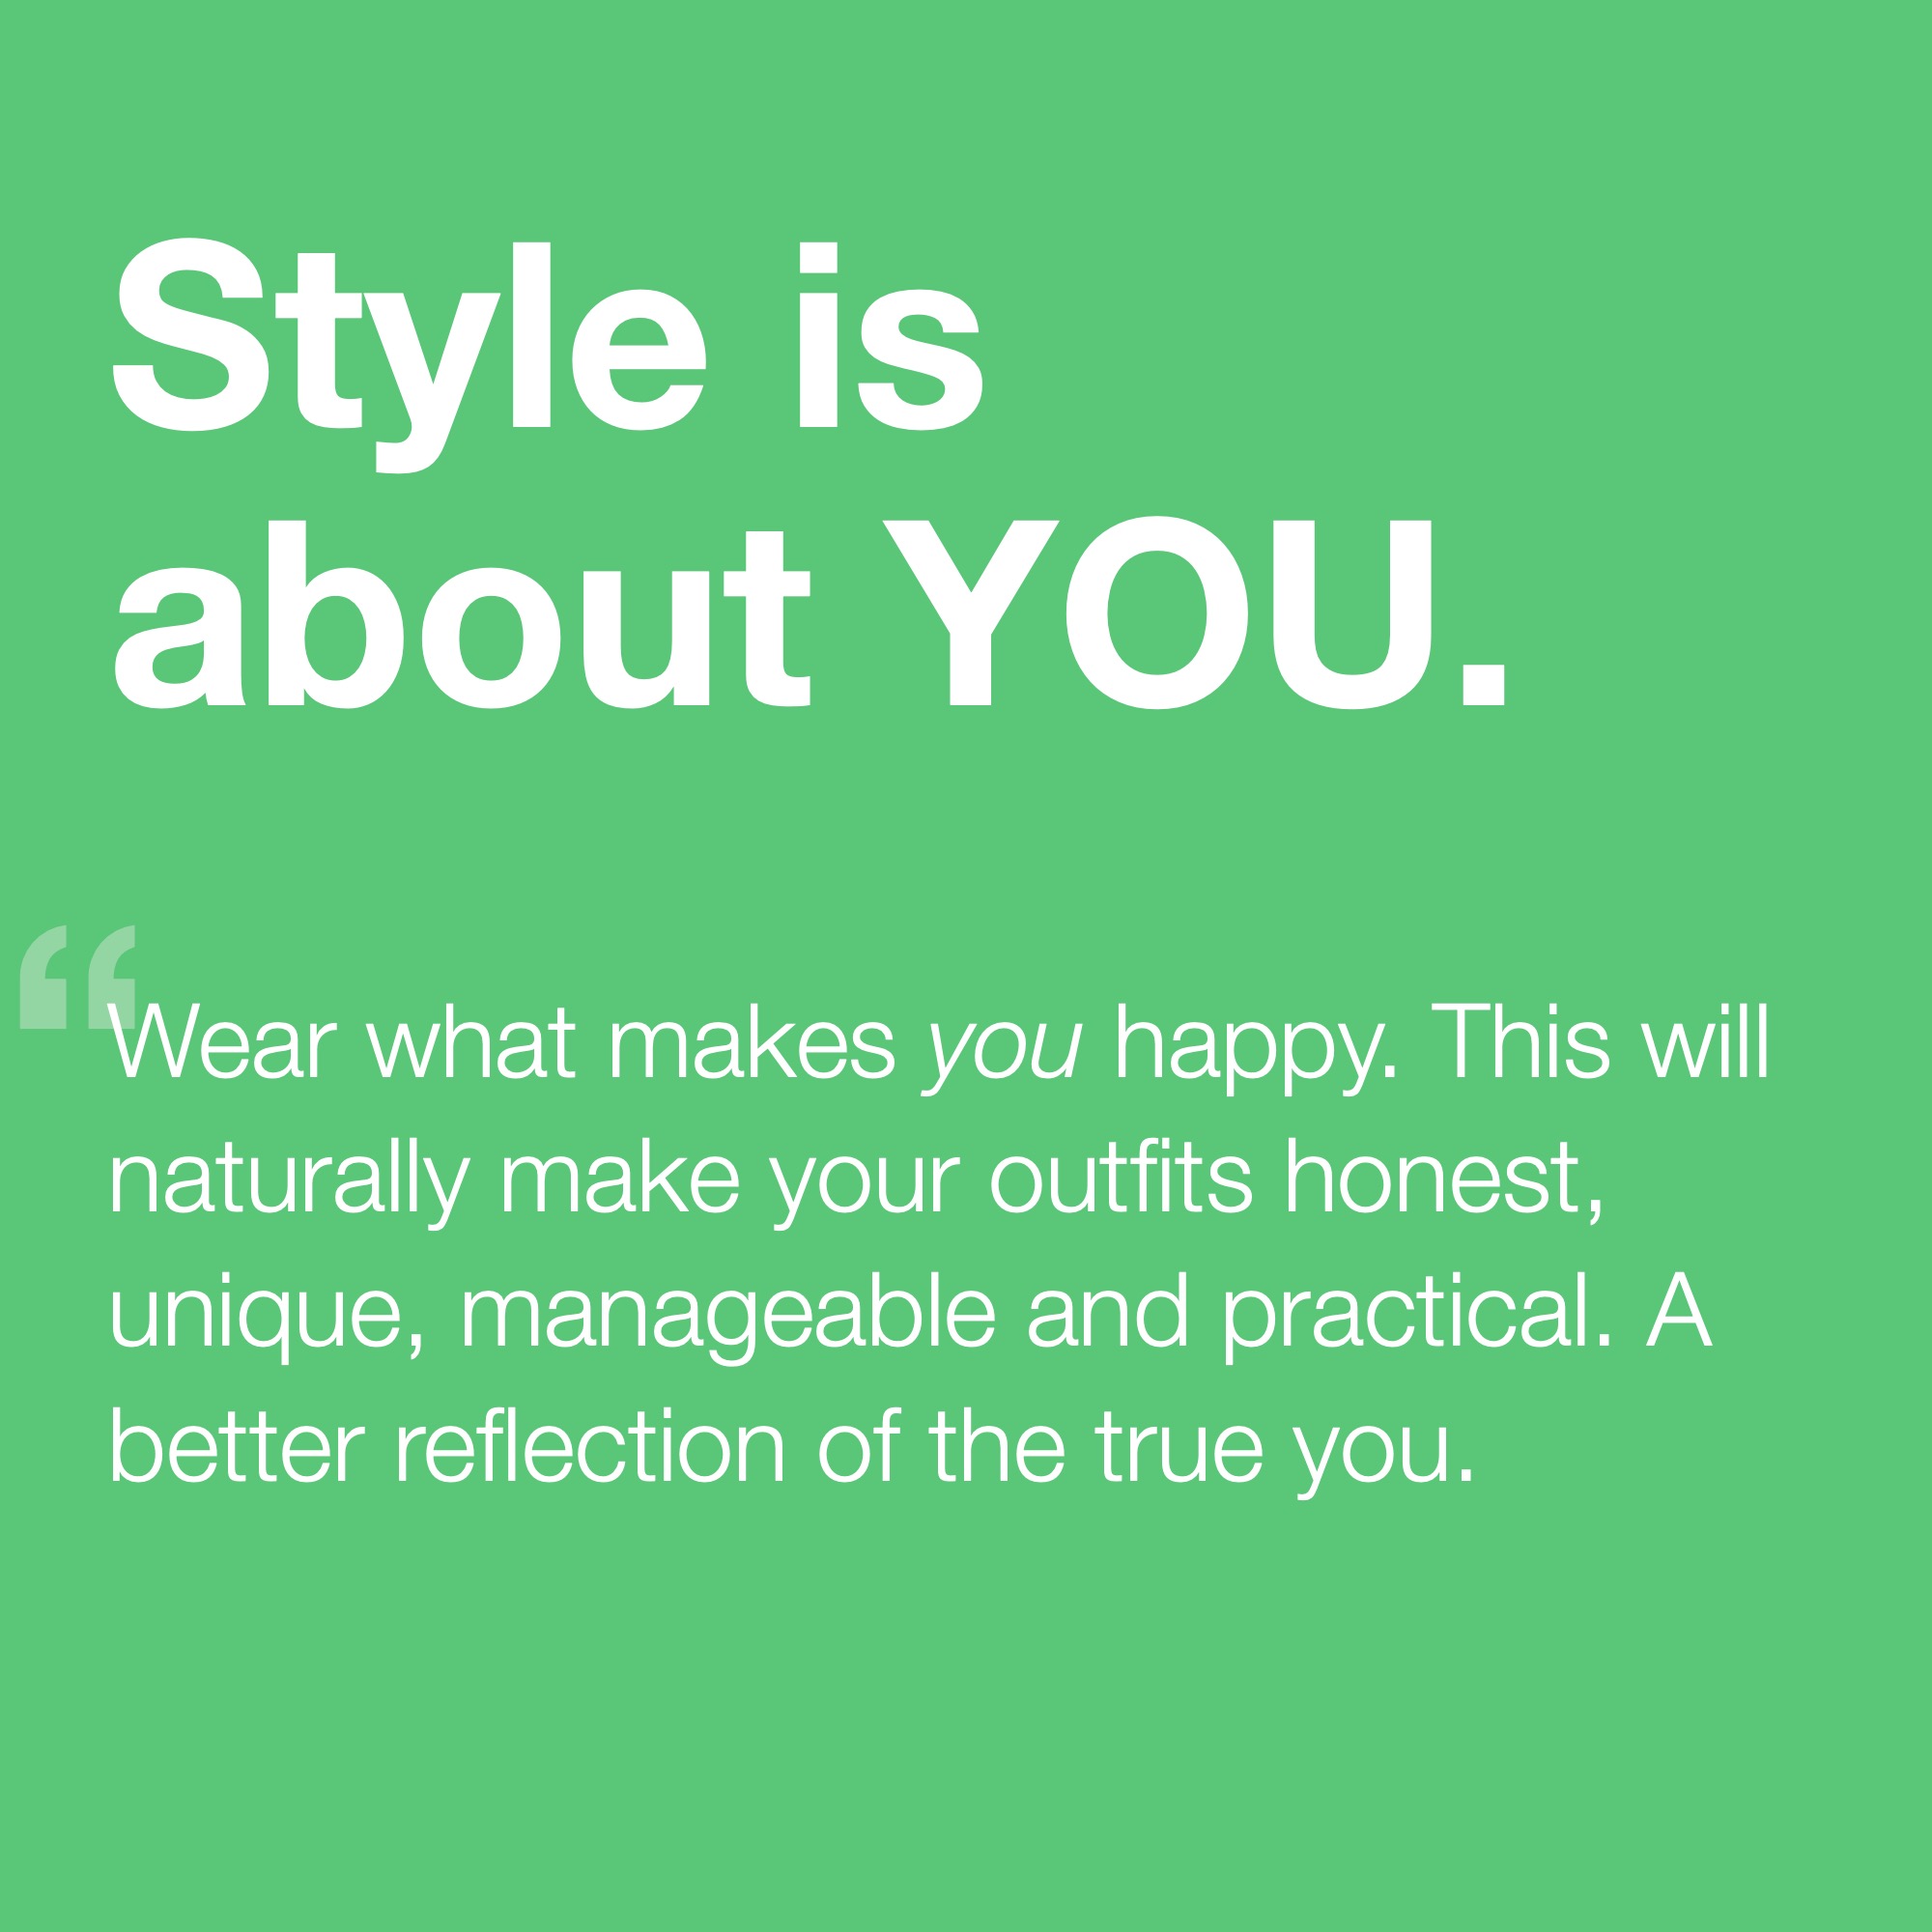 Style is About You